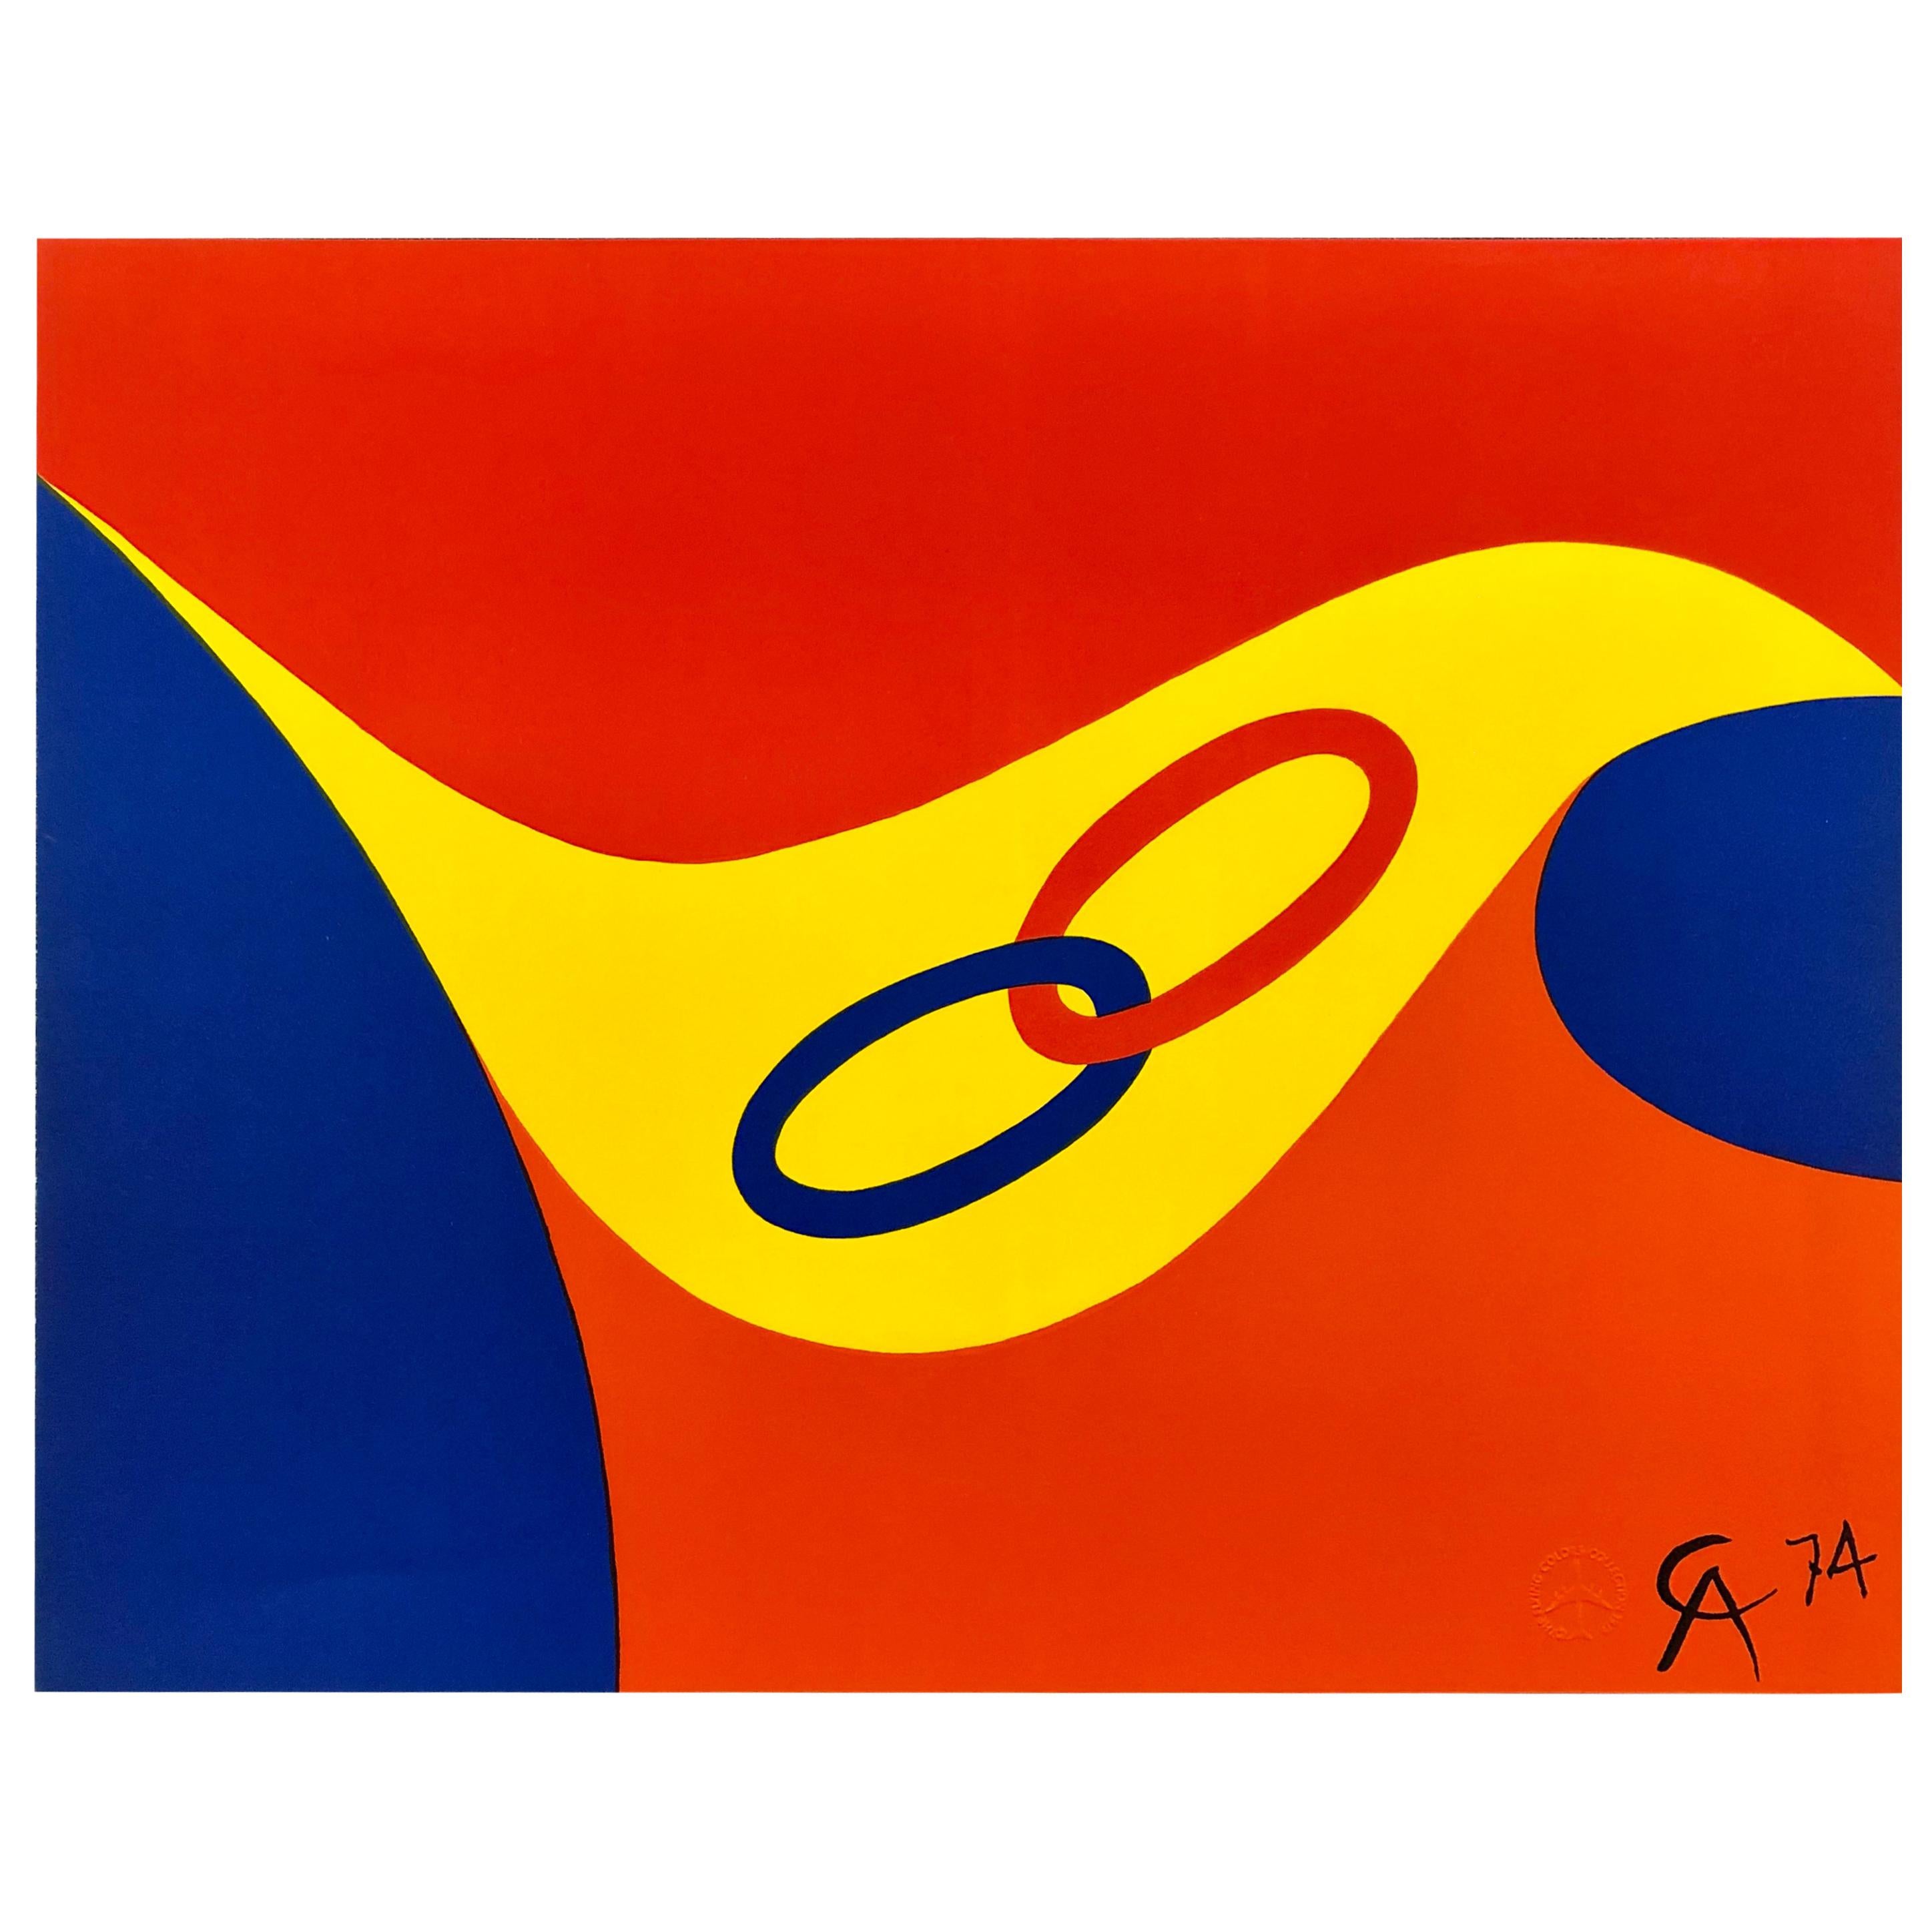 Original Alexander Calder Litho from the Flying Colors Collection, 1975